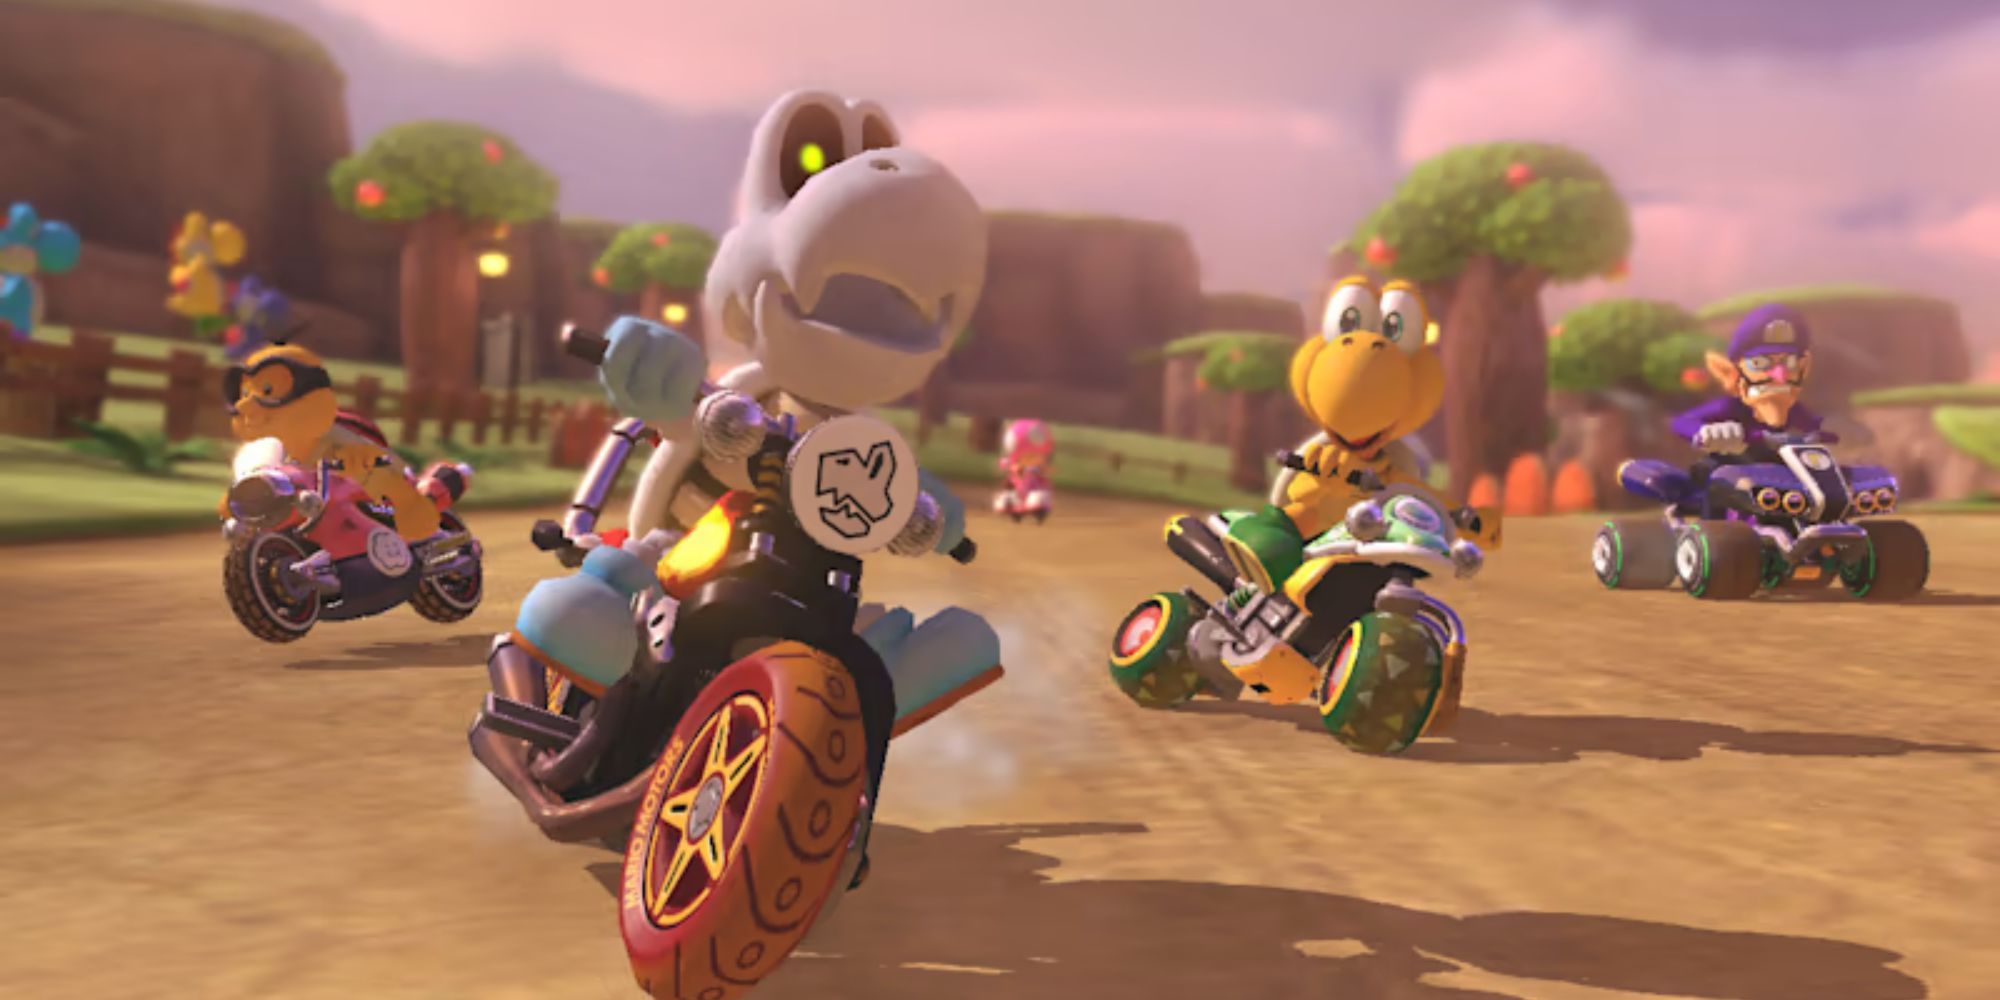 Dry Bones rides a motorcycle past a group of other racers